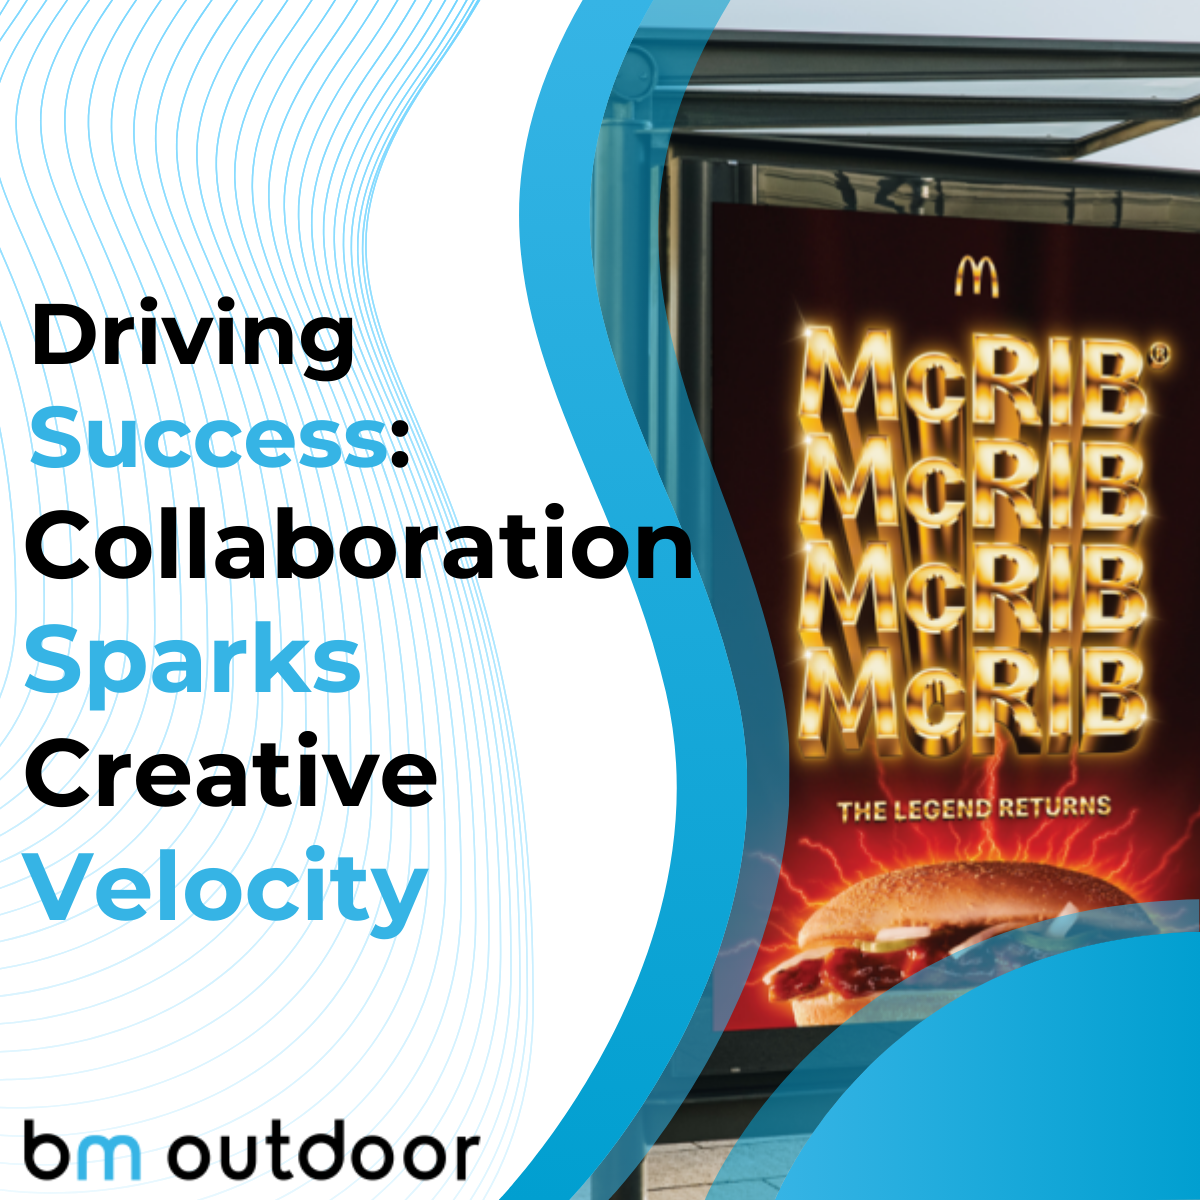 Unlock the power of OOH advertising—building brands with broad reach, visual impact, and online engagement.